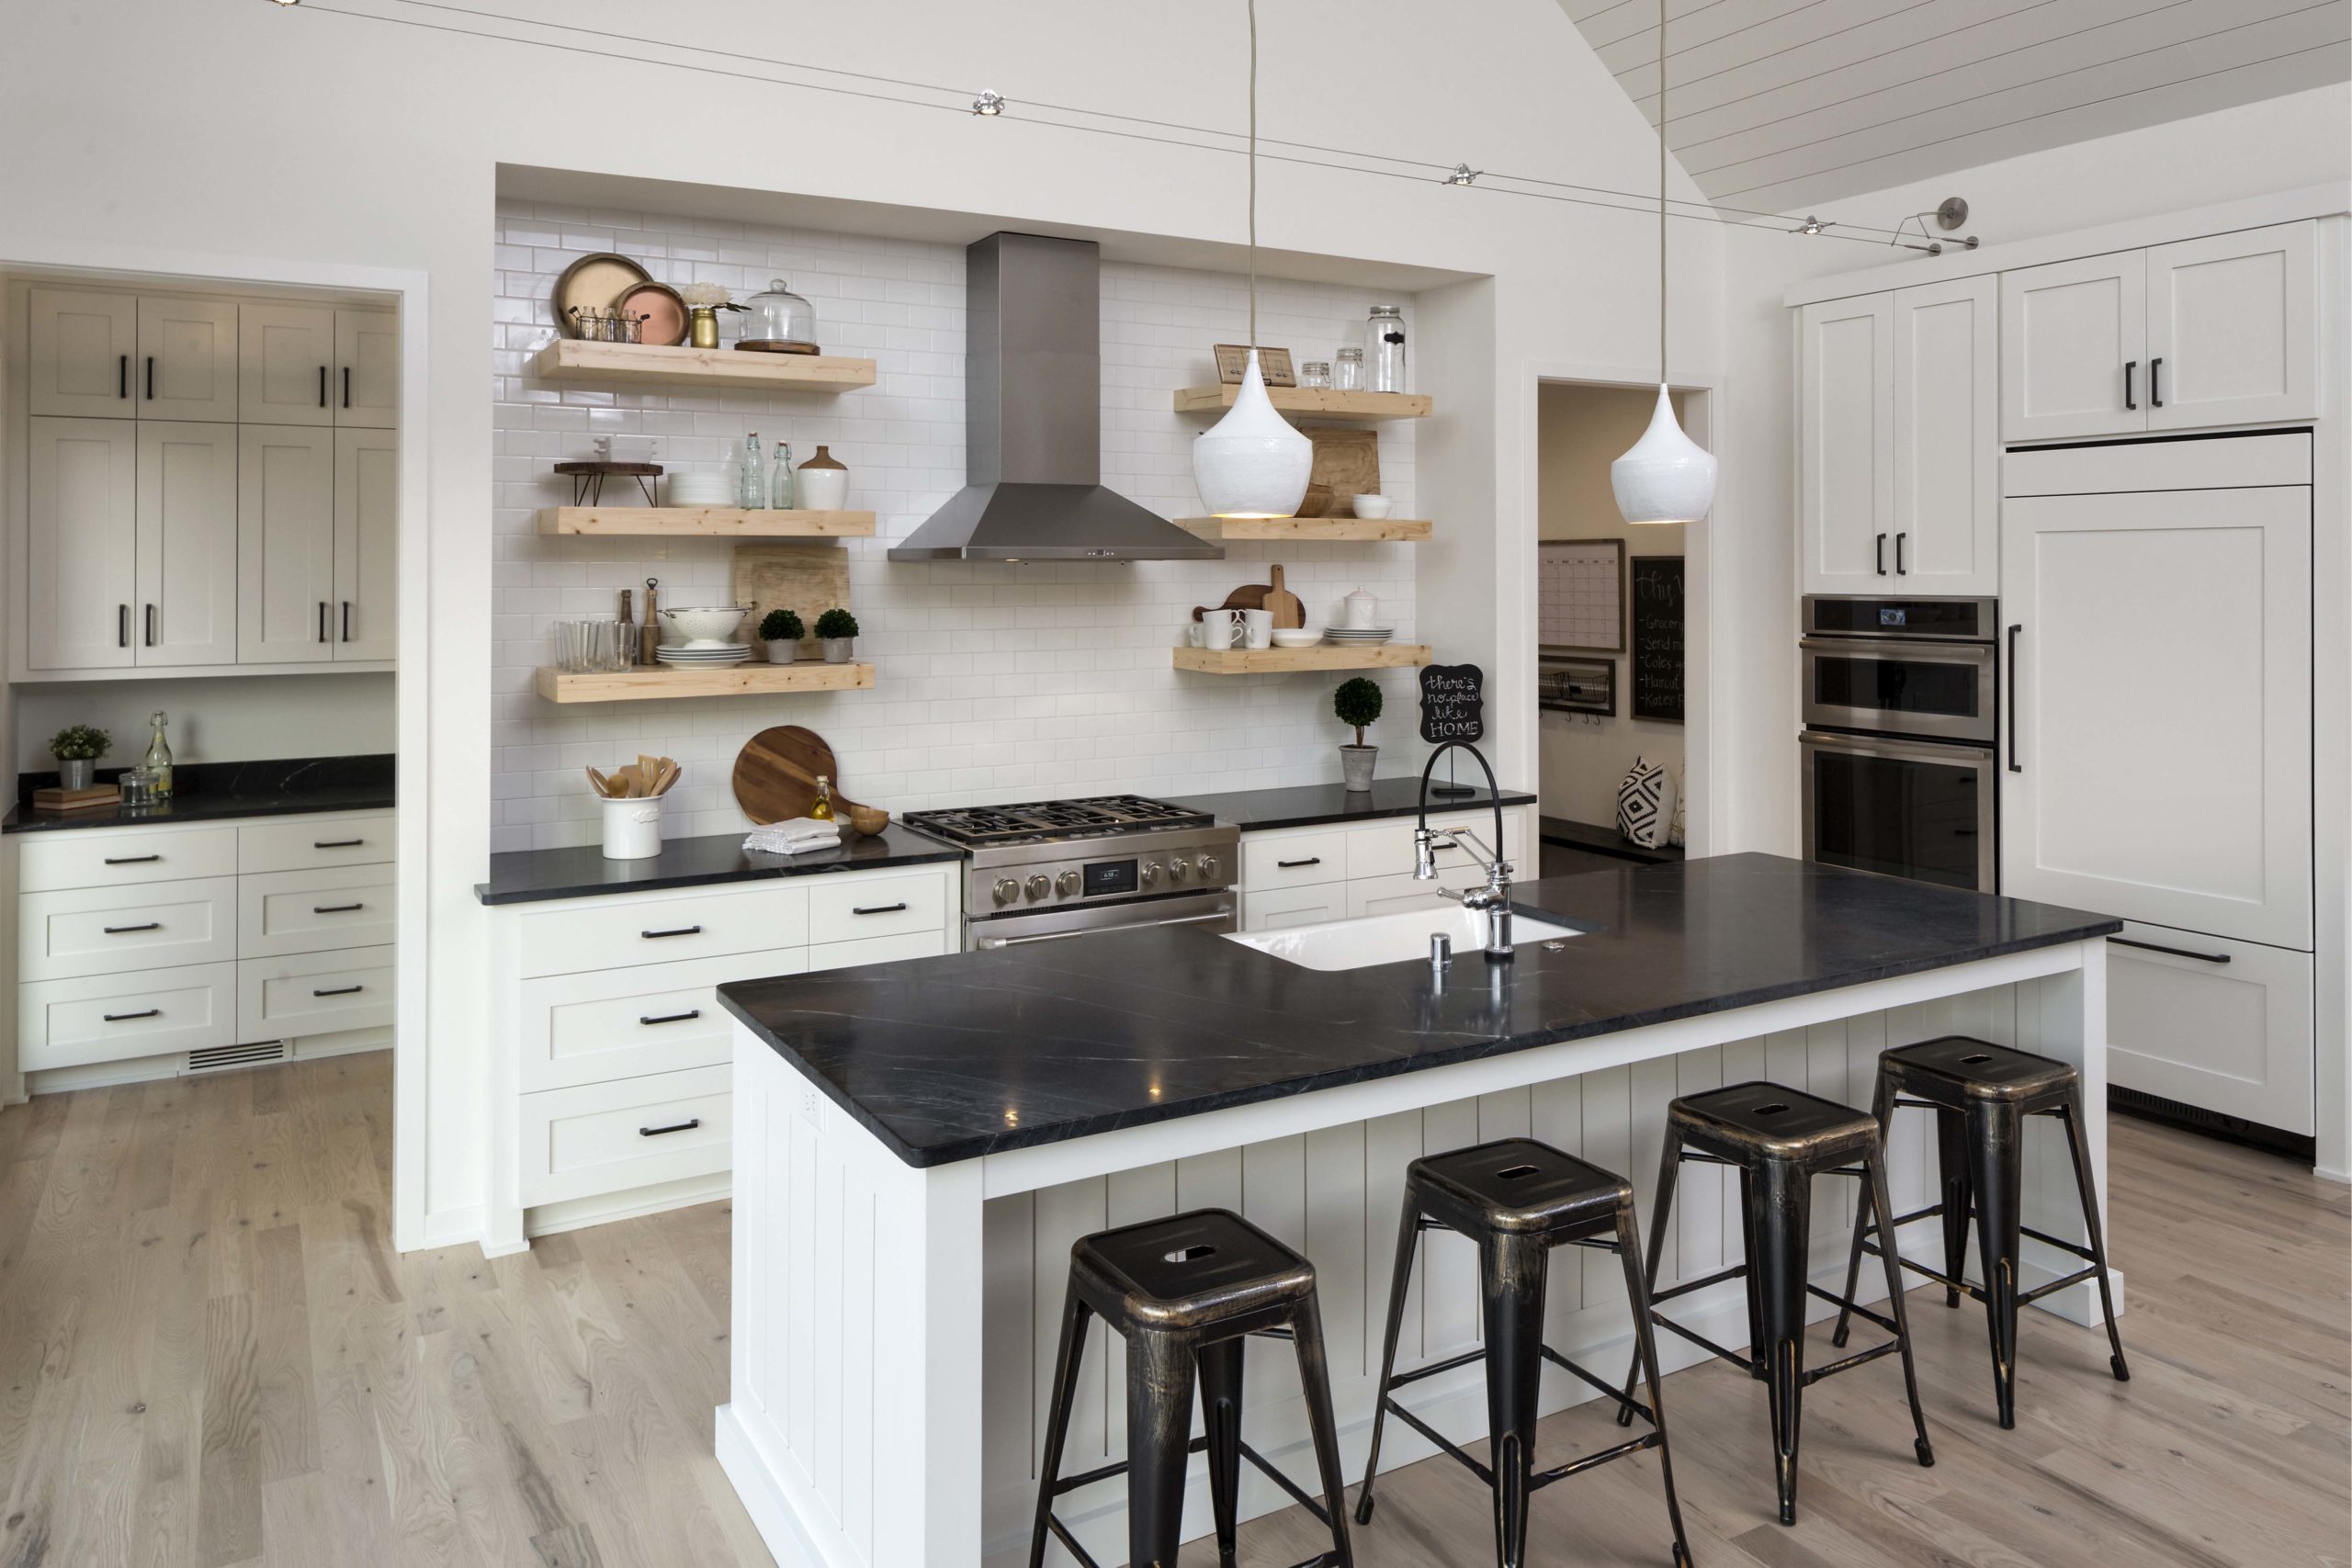 A white kitchen with black counter tops and stools in Reverence farmhouse style.